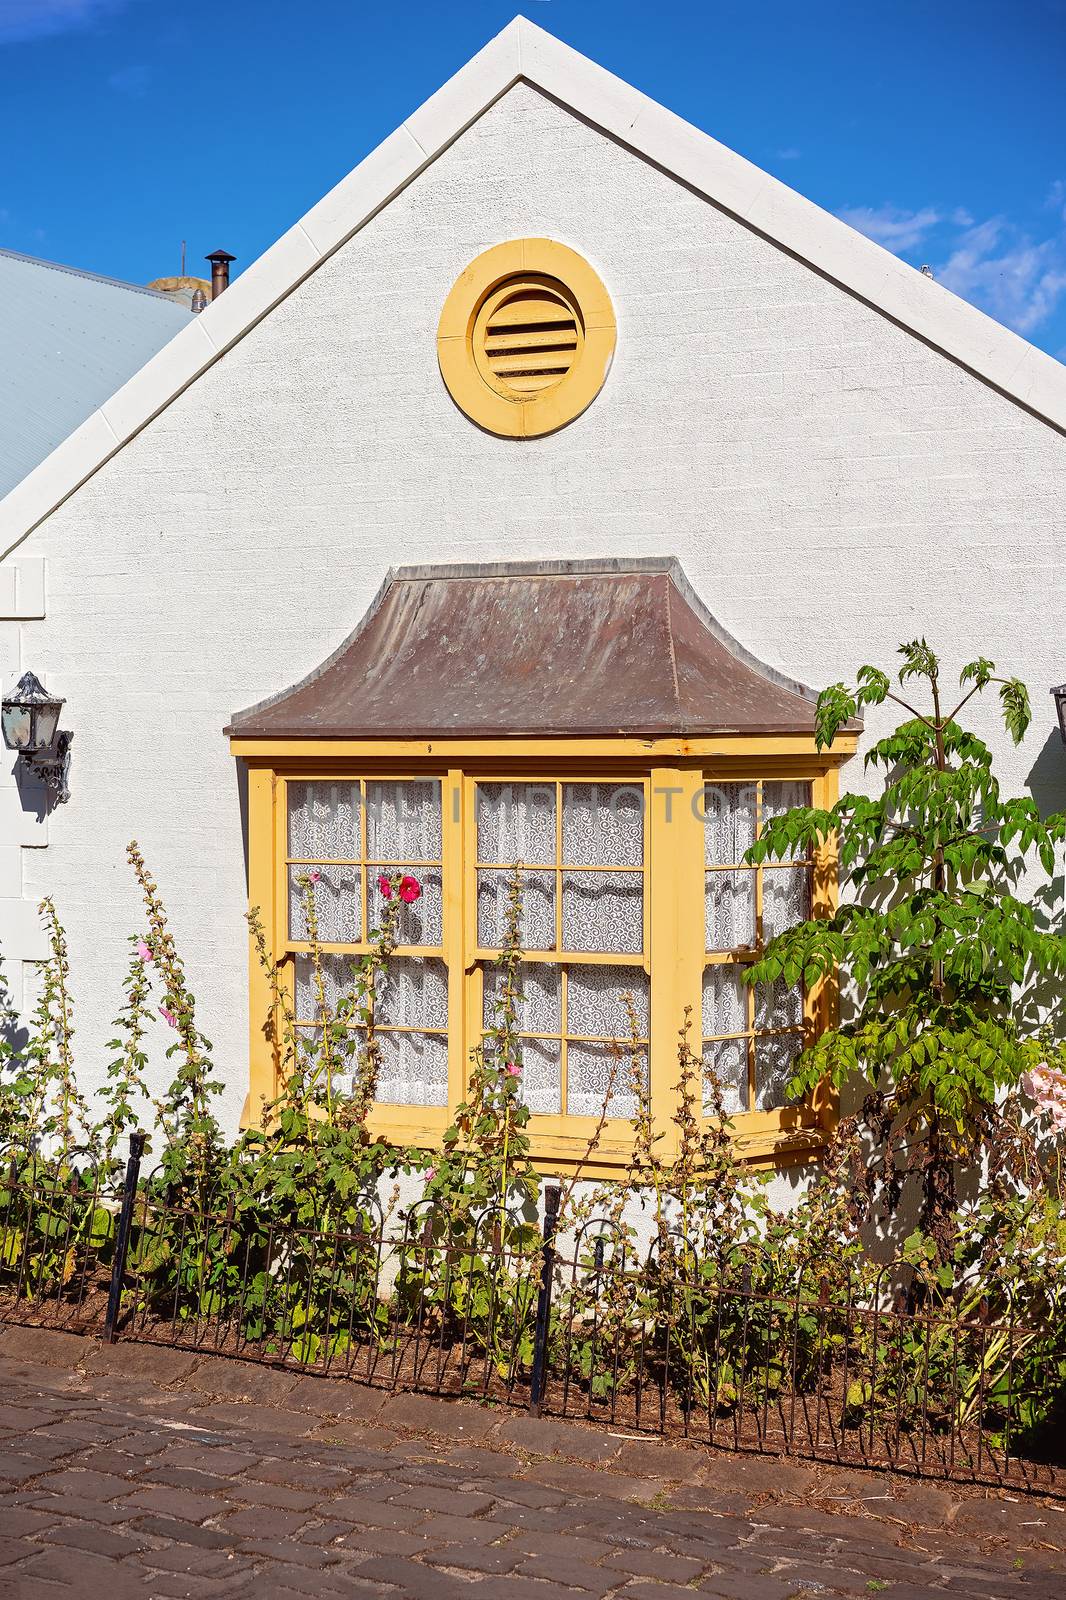 Bay window frontage of a typical cottage recreated from 19th century Australia